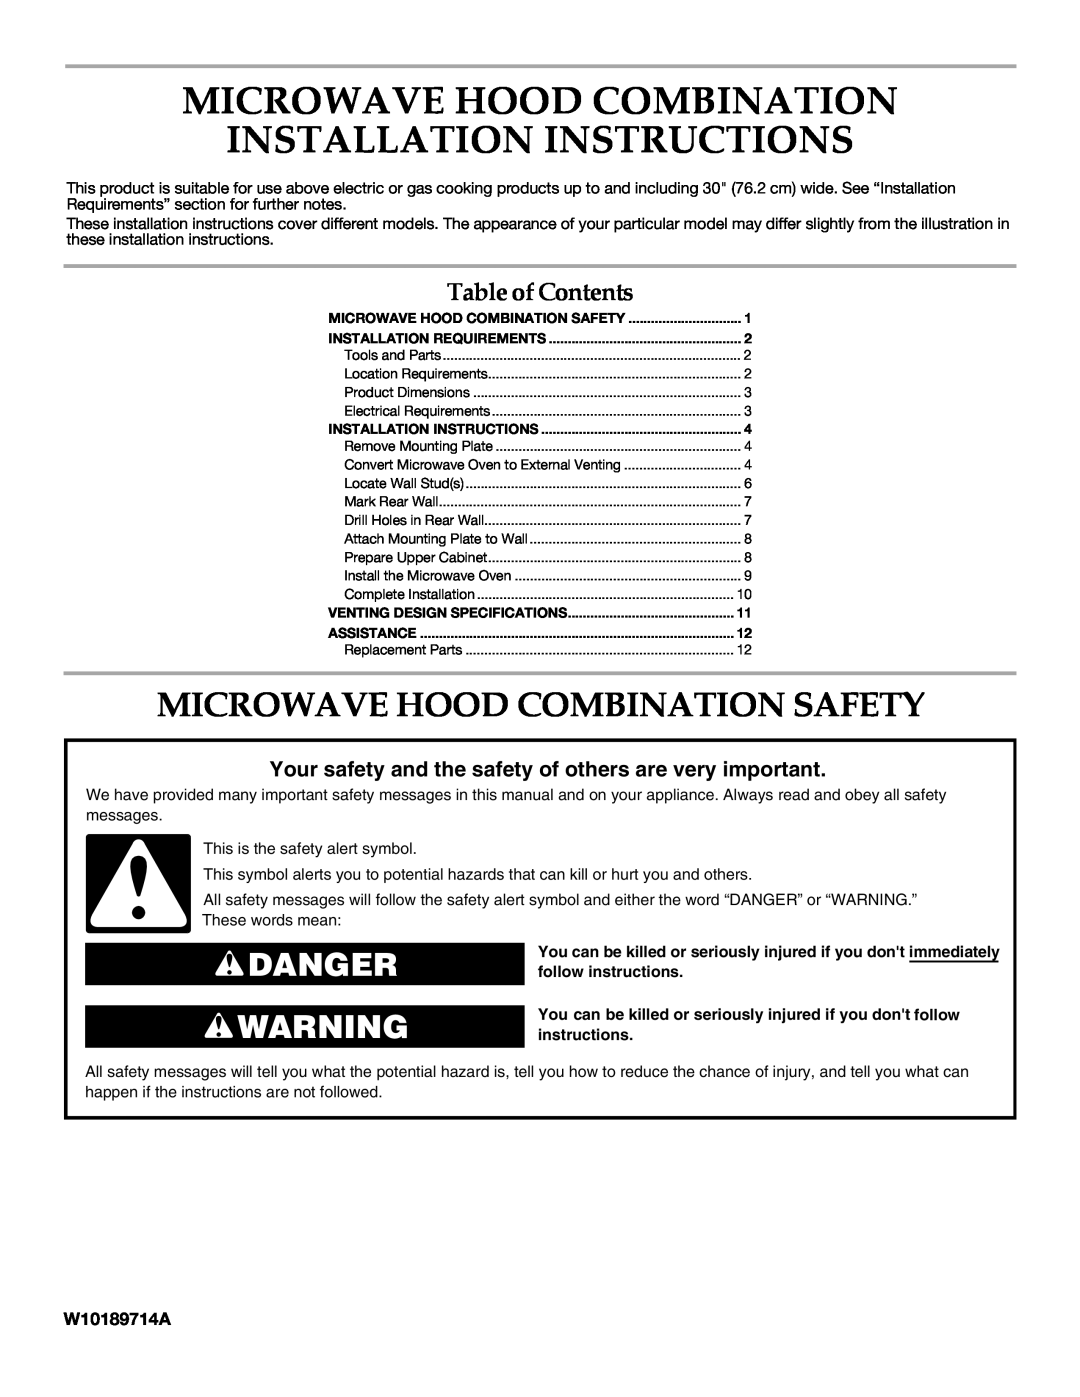 KitchenAid W10189714A, W10190011A installation instructions Microwave Hood Combination Safety, Danger, Table of Contents 